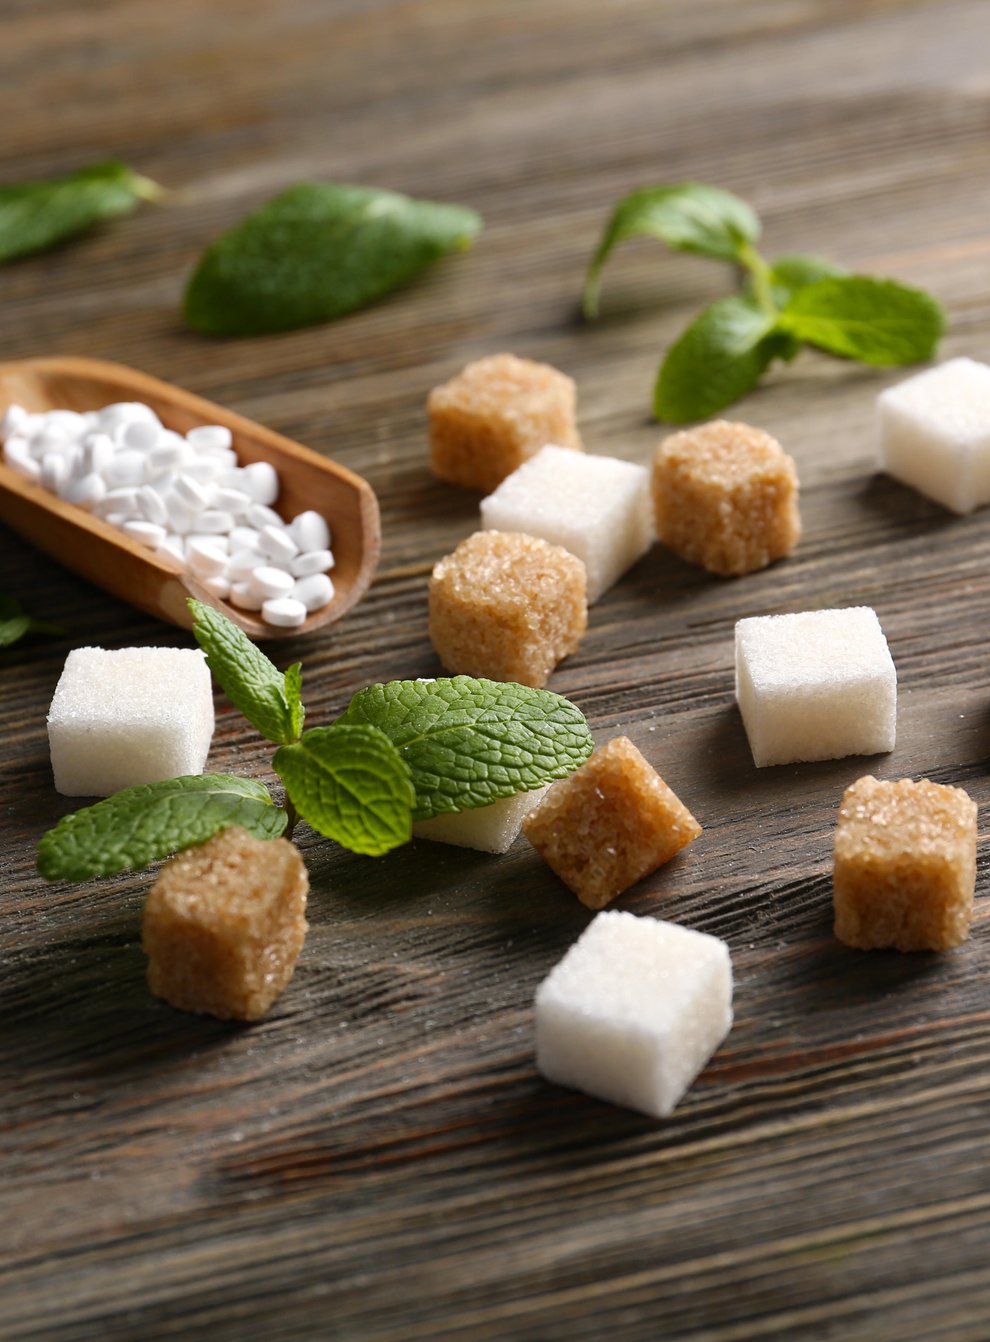 Sugar cubes and stevia on wooden background